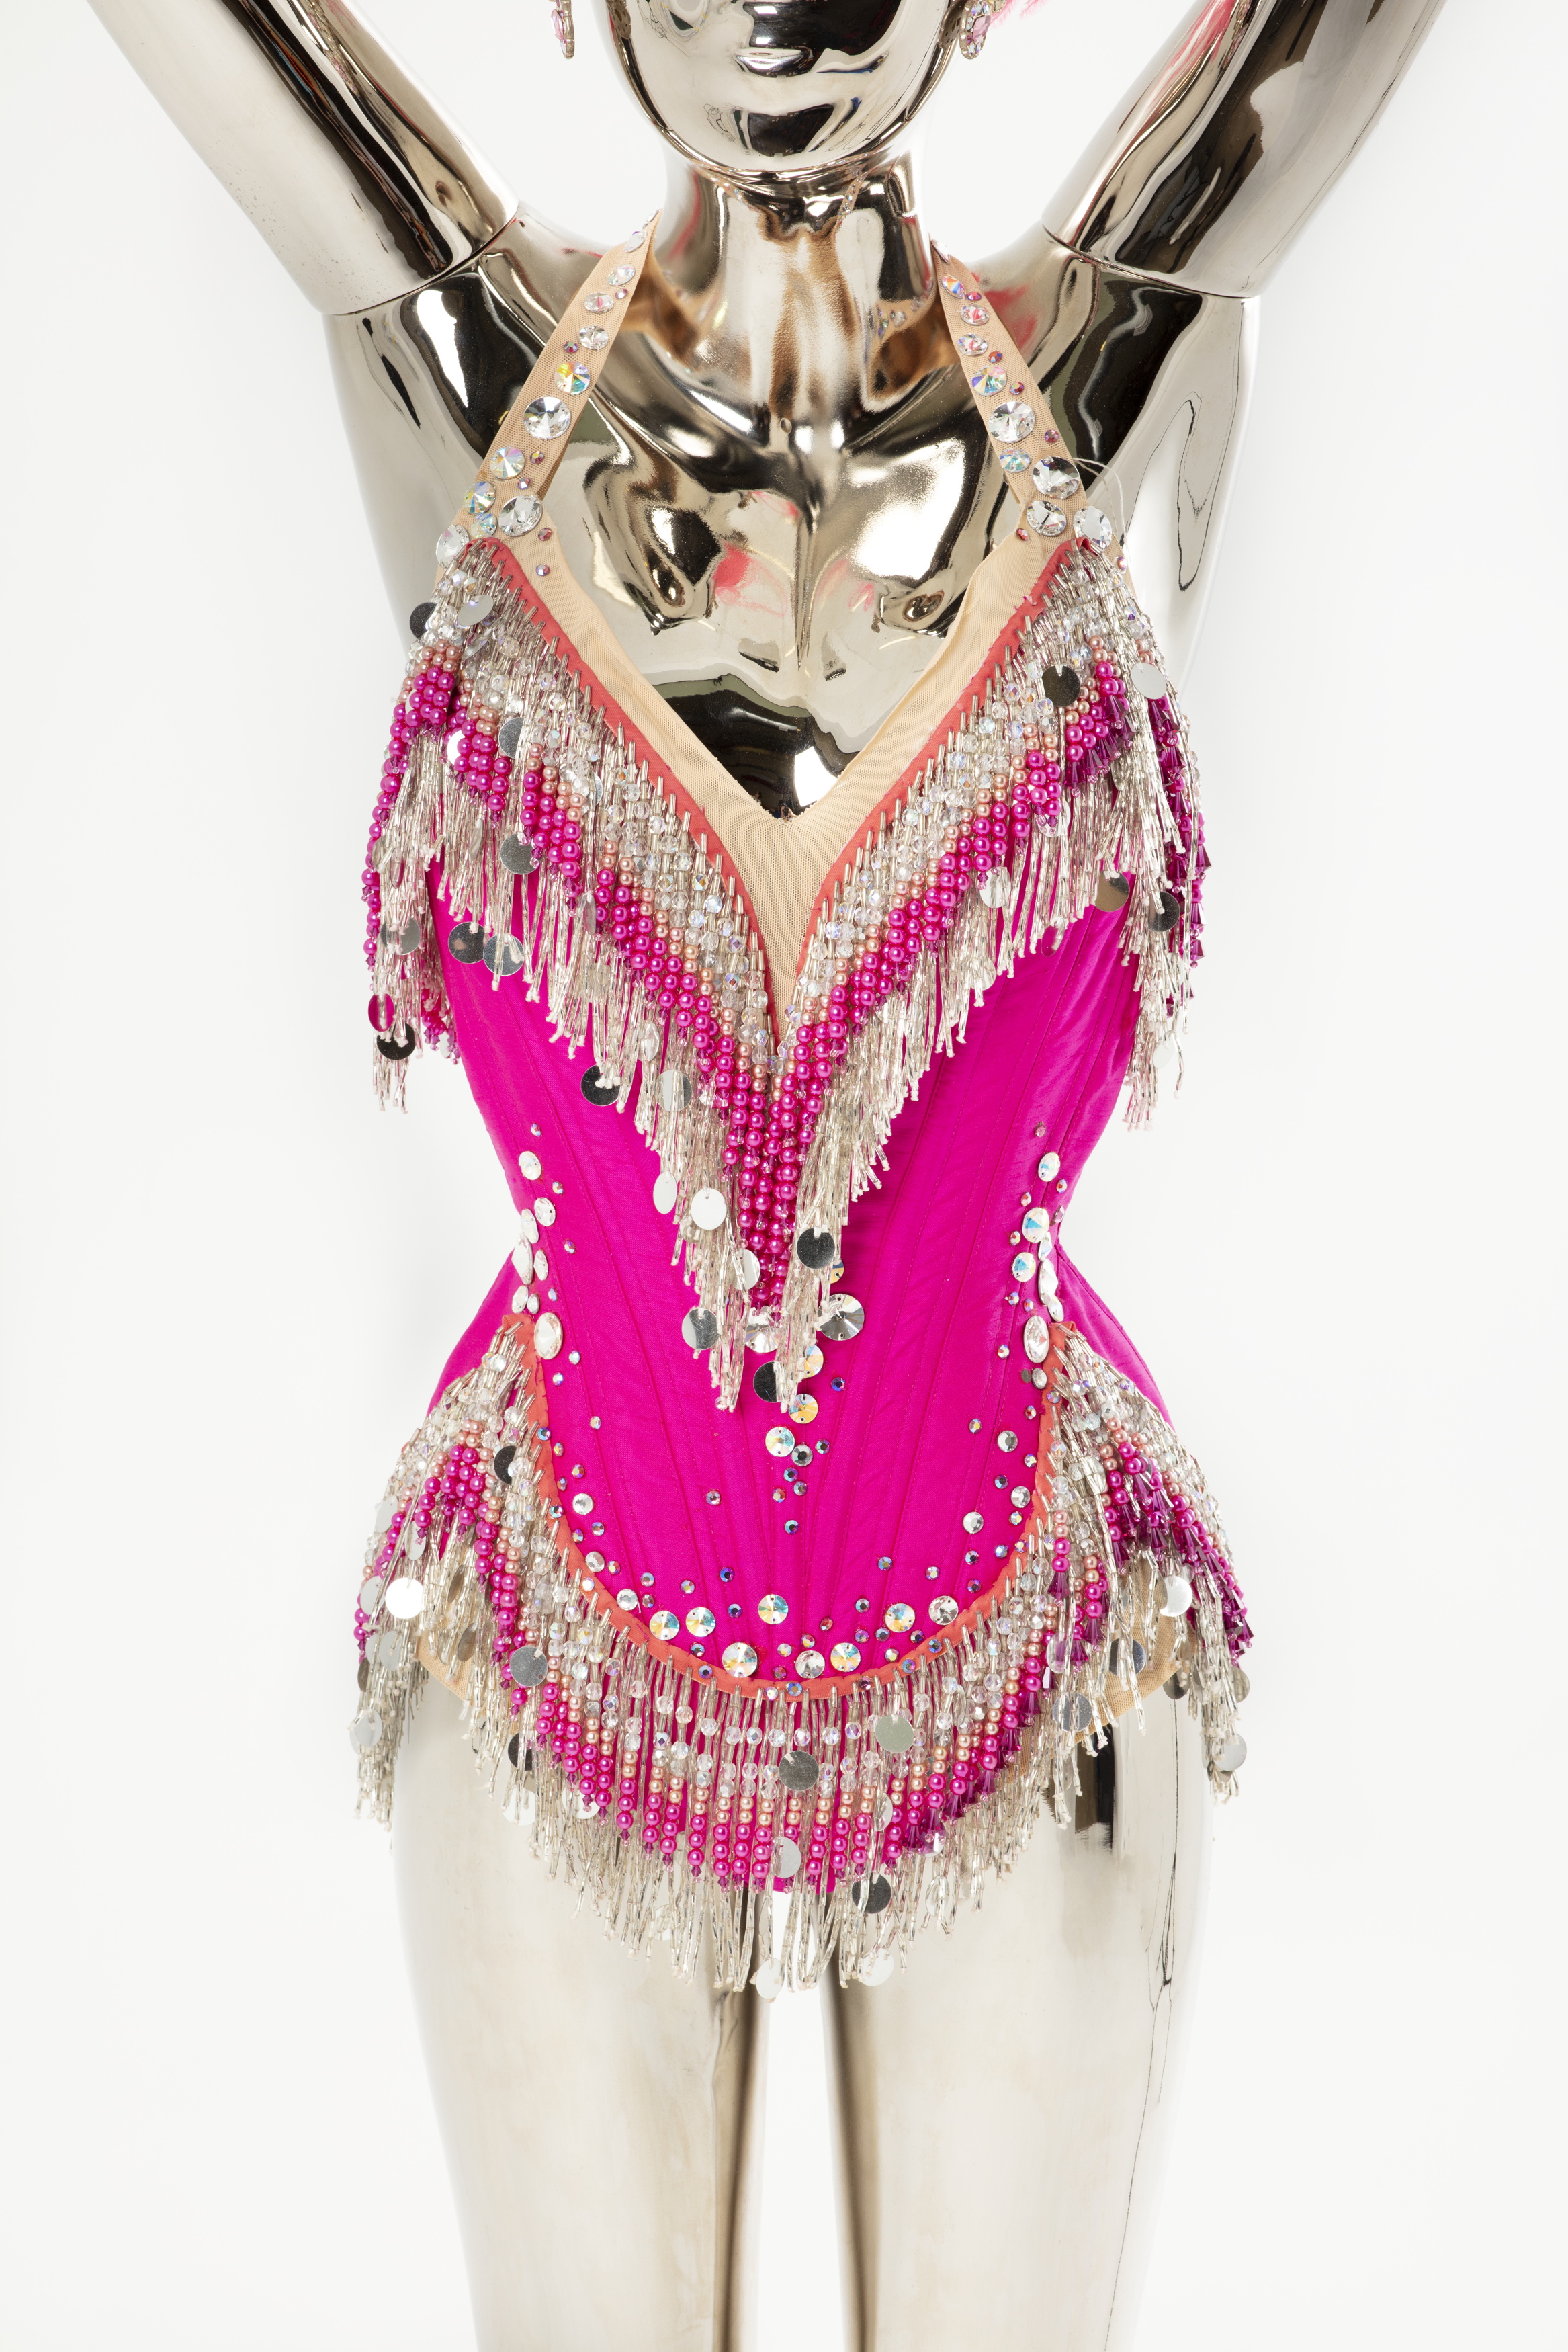 'Kylie Showgirl' costume worn by Kylie Minogue in the Sydney 2000 Olympic Games Closing Ceremony